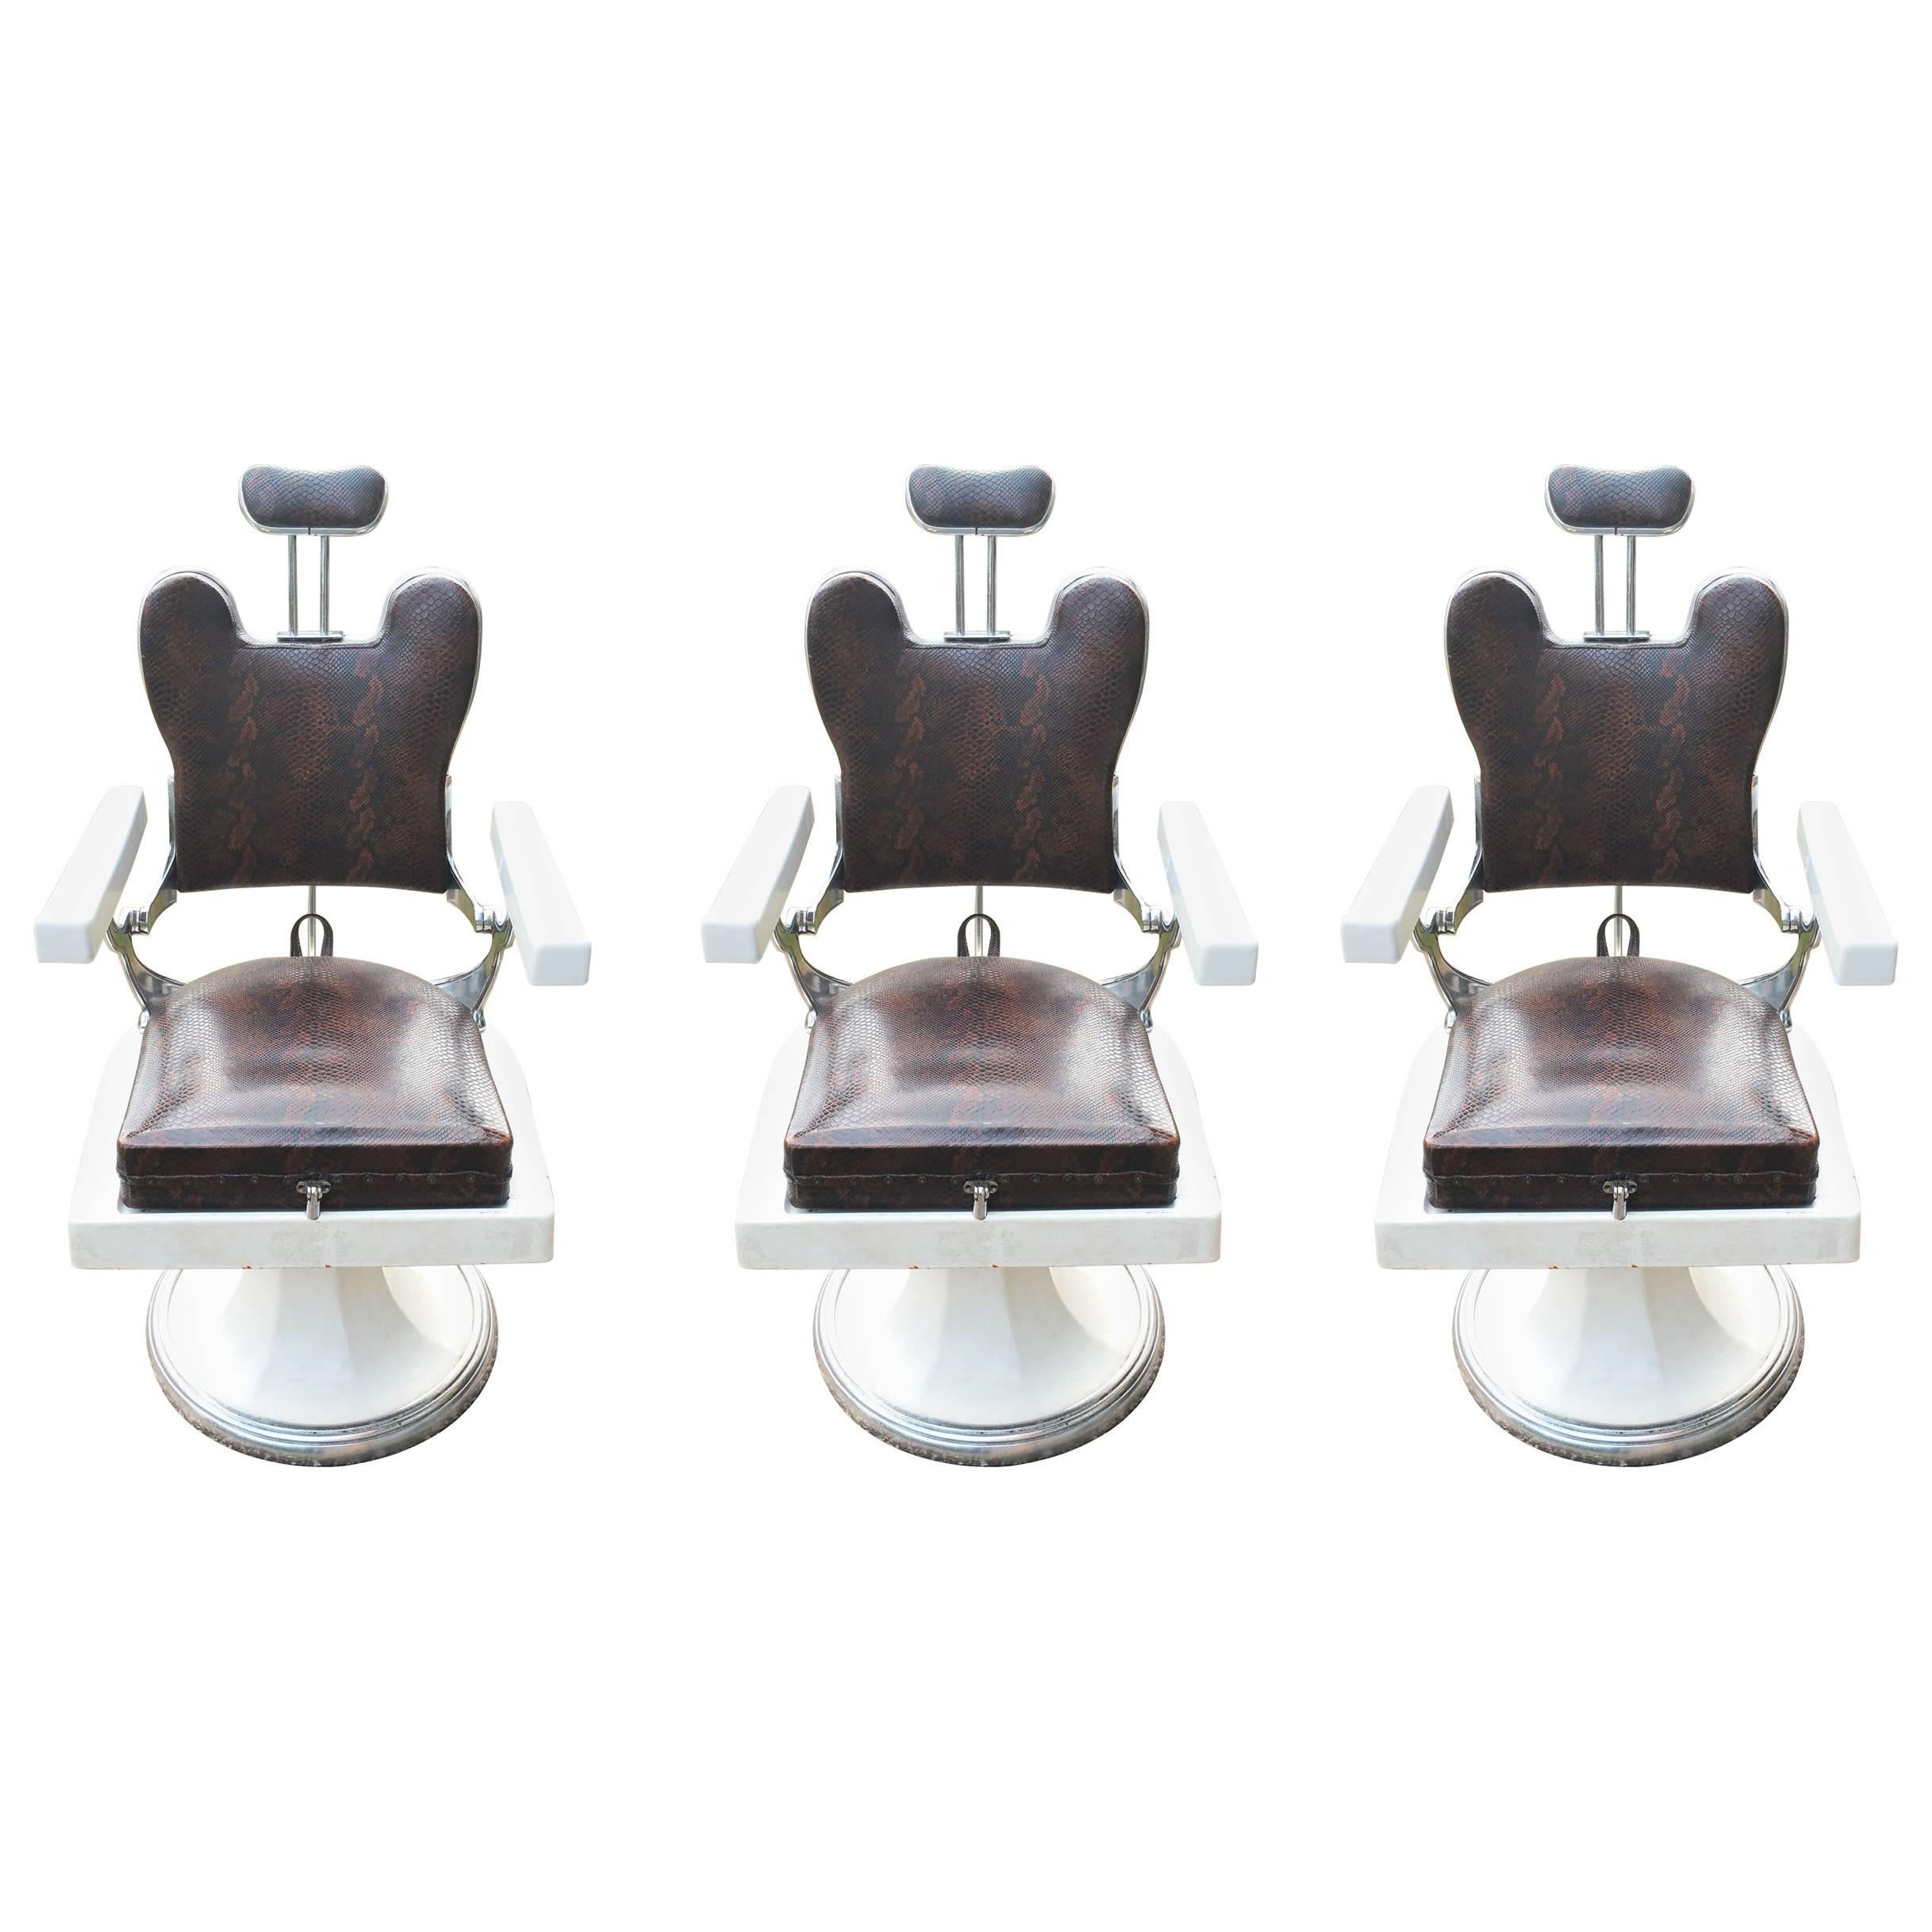 Set of Three French Barber Hairdresser's Chairs, in Original Crocodile Leather